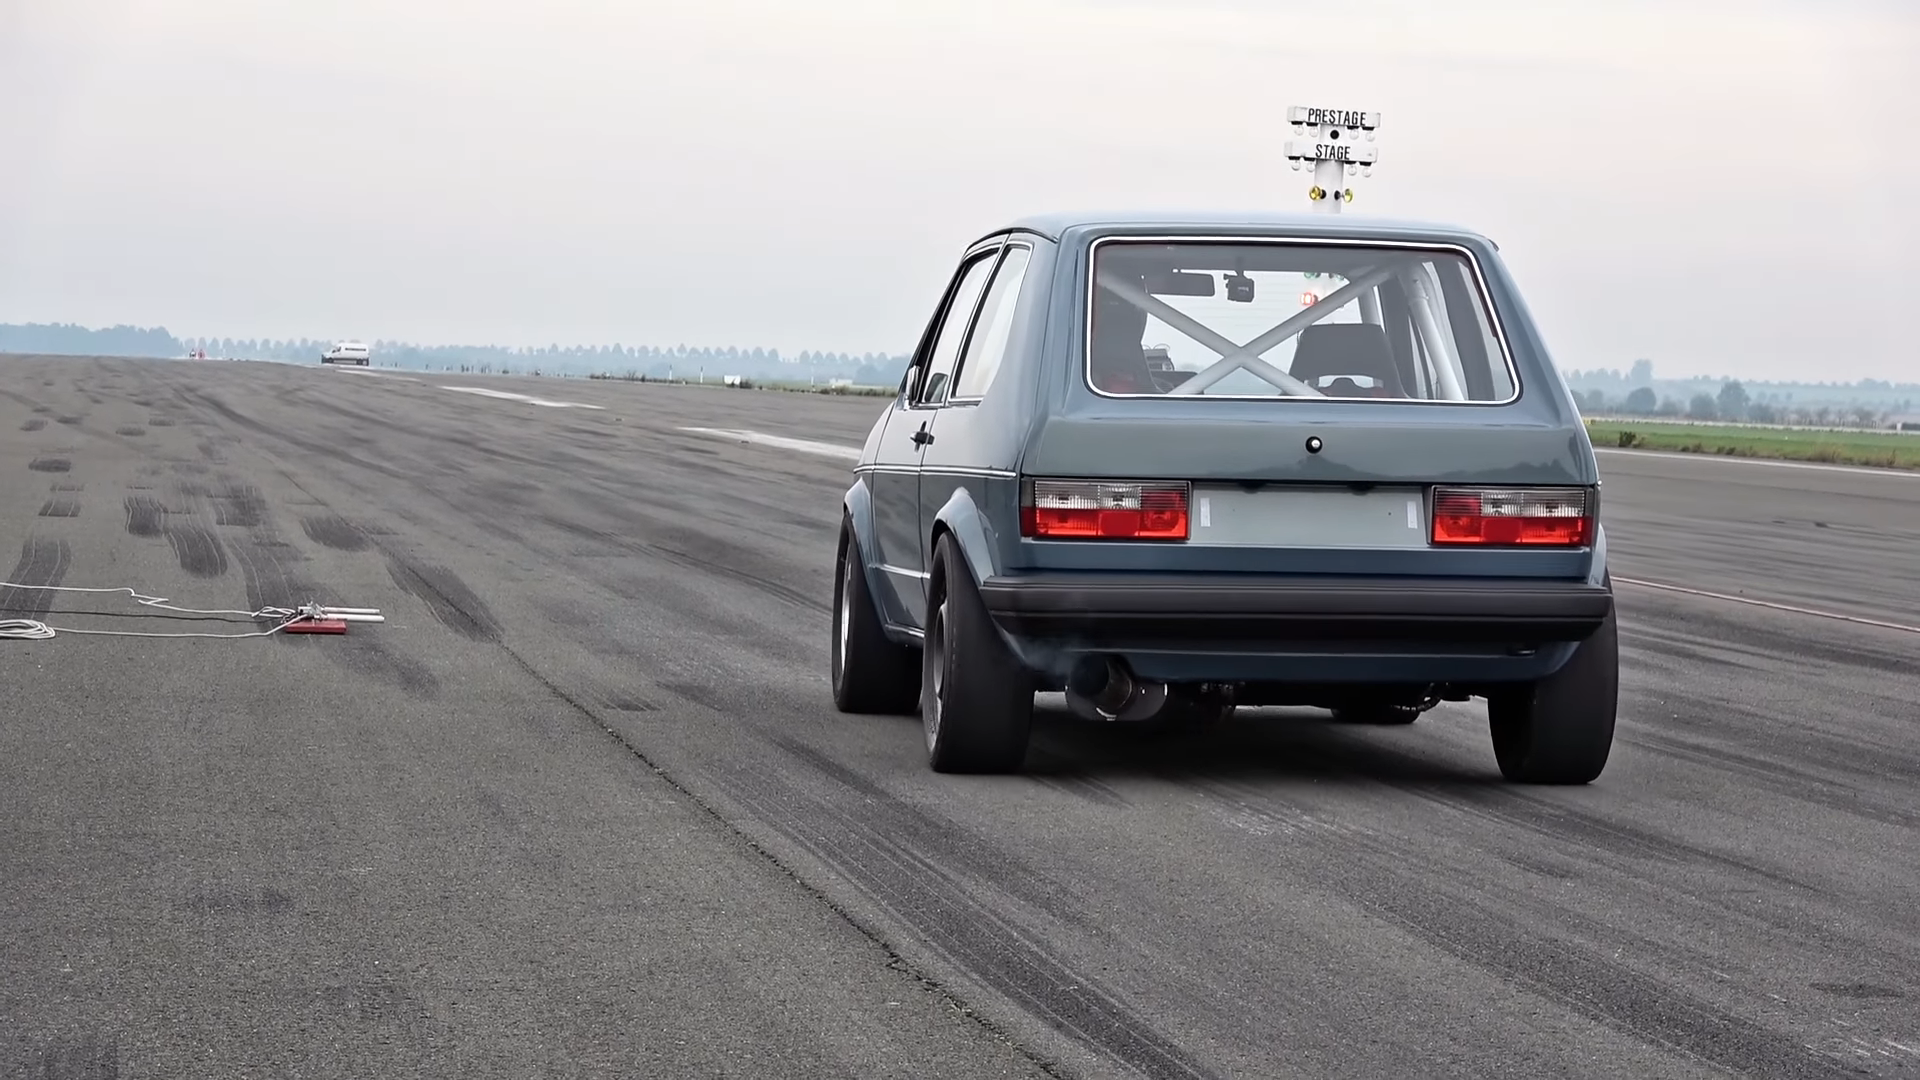 Watch This 940 HP Volkswagen Golf Casually Hit 191 Miles Per Hour